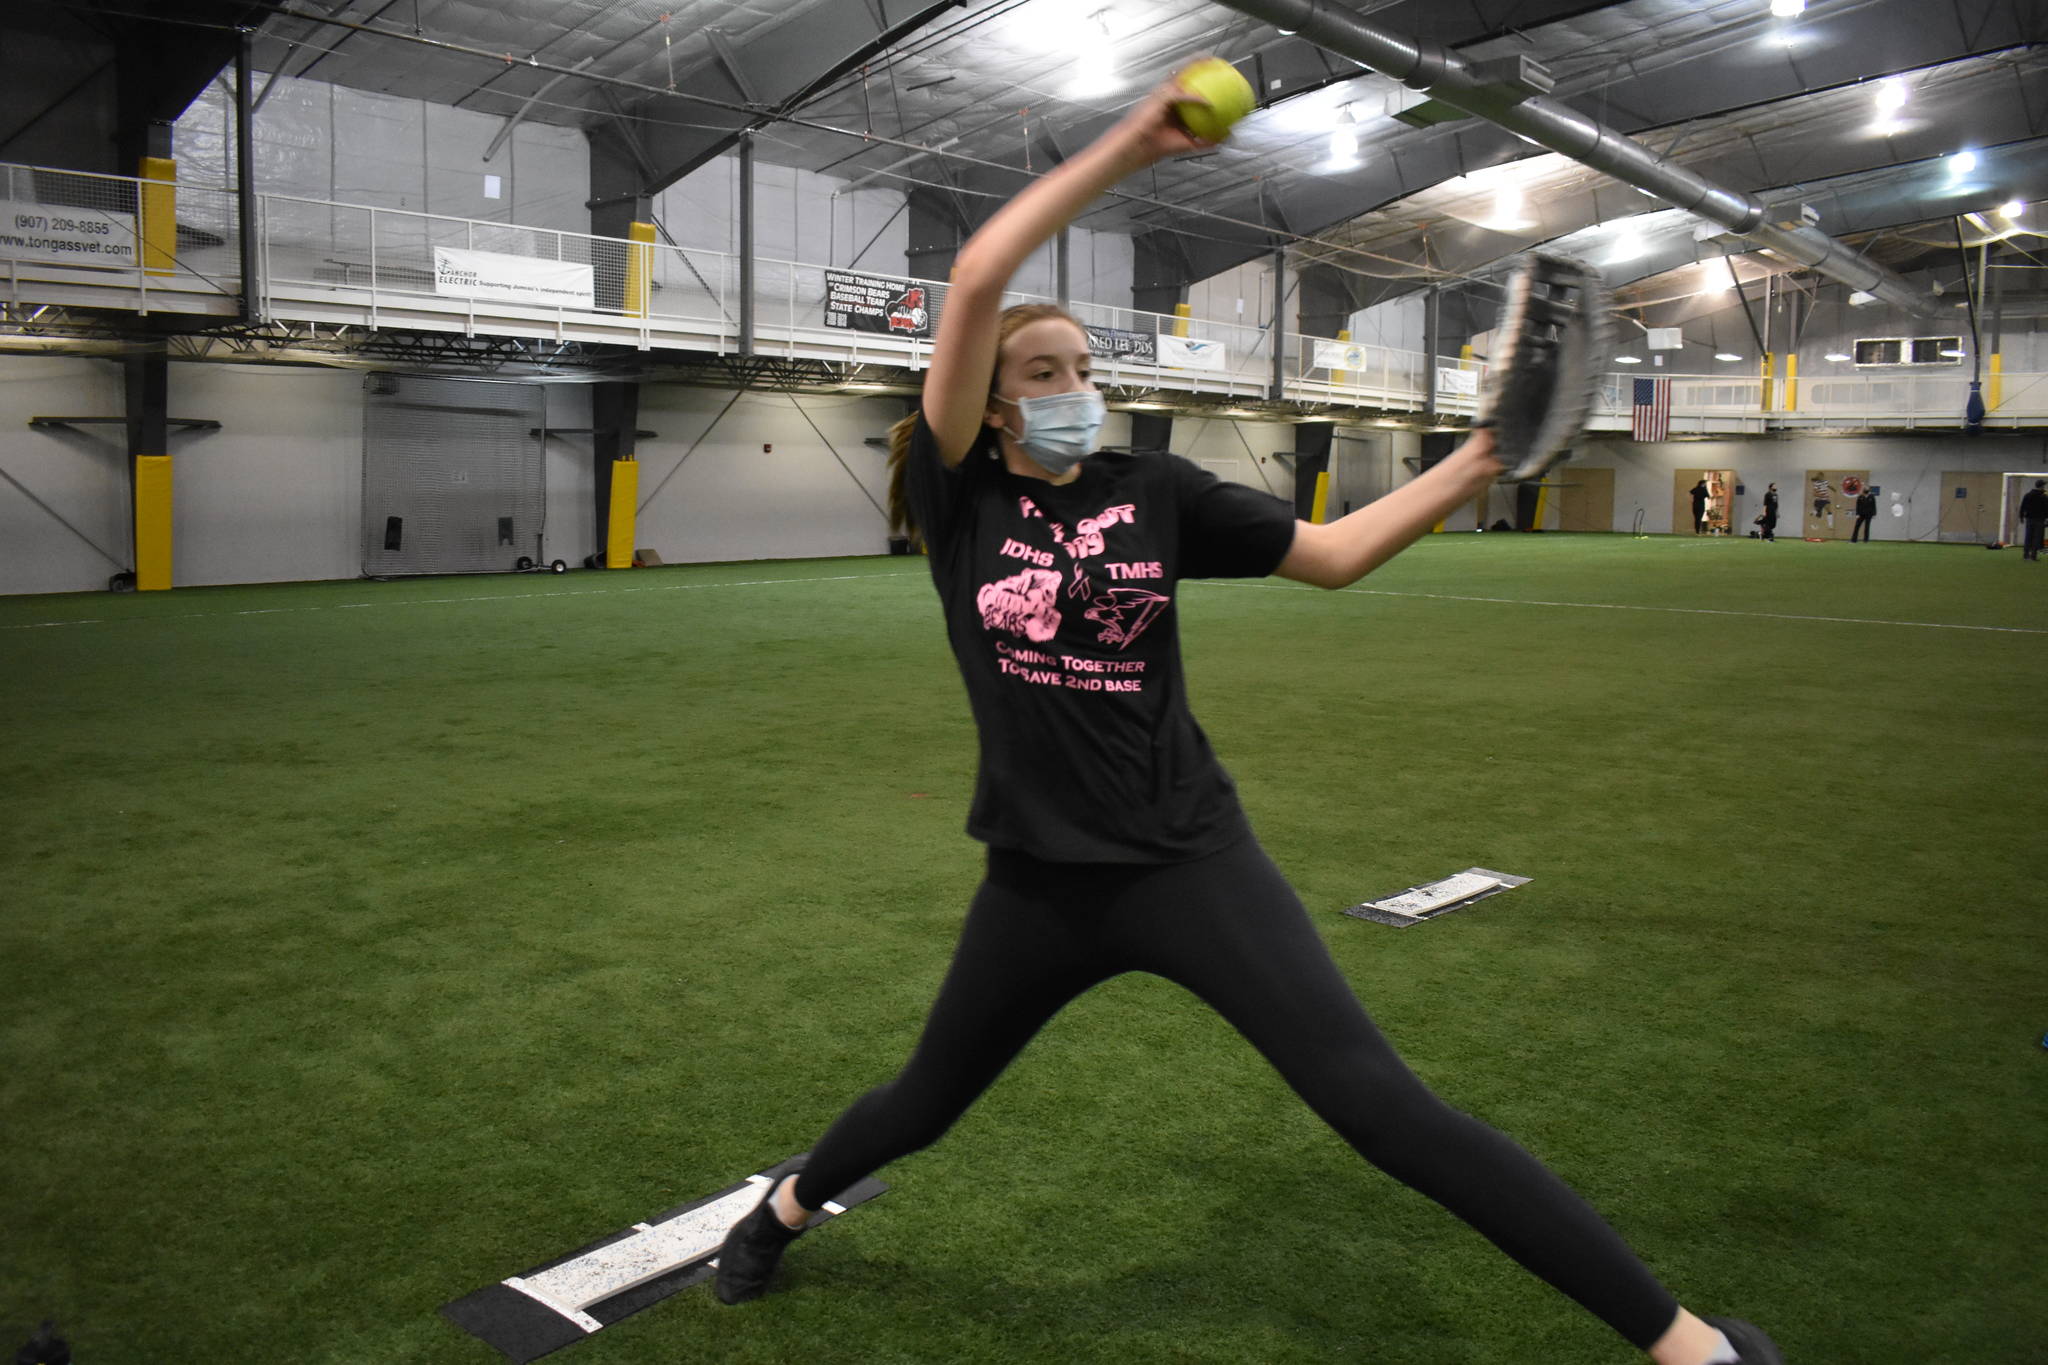 JDHS player Mila Hargrave winds up to deliver pitch during a recent practice. (Courtesy Photo / Lexie Razor)